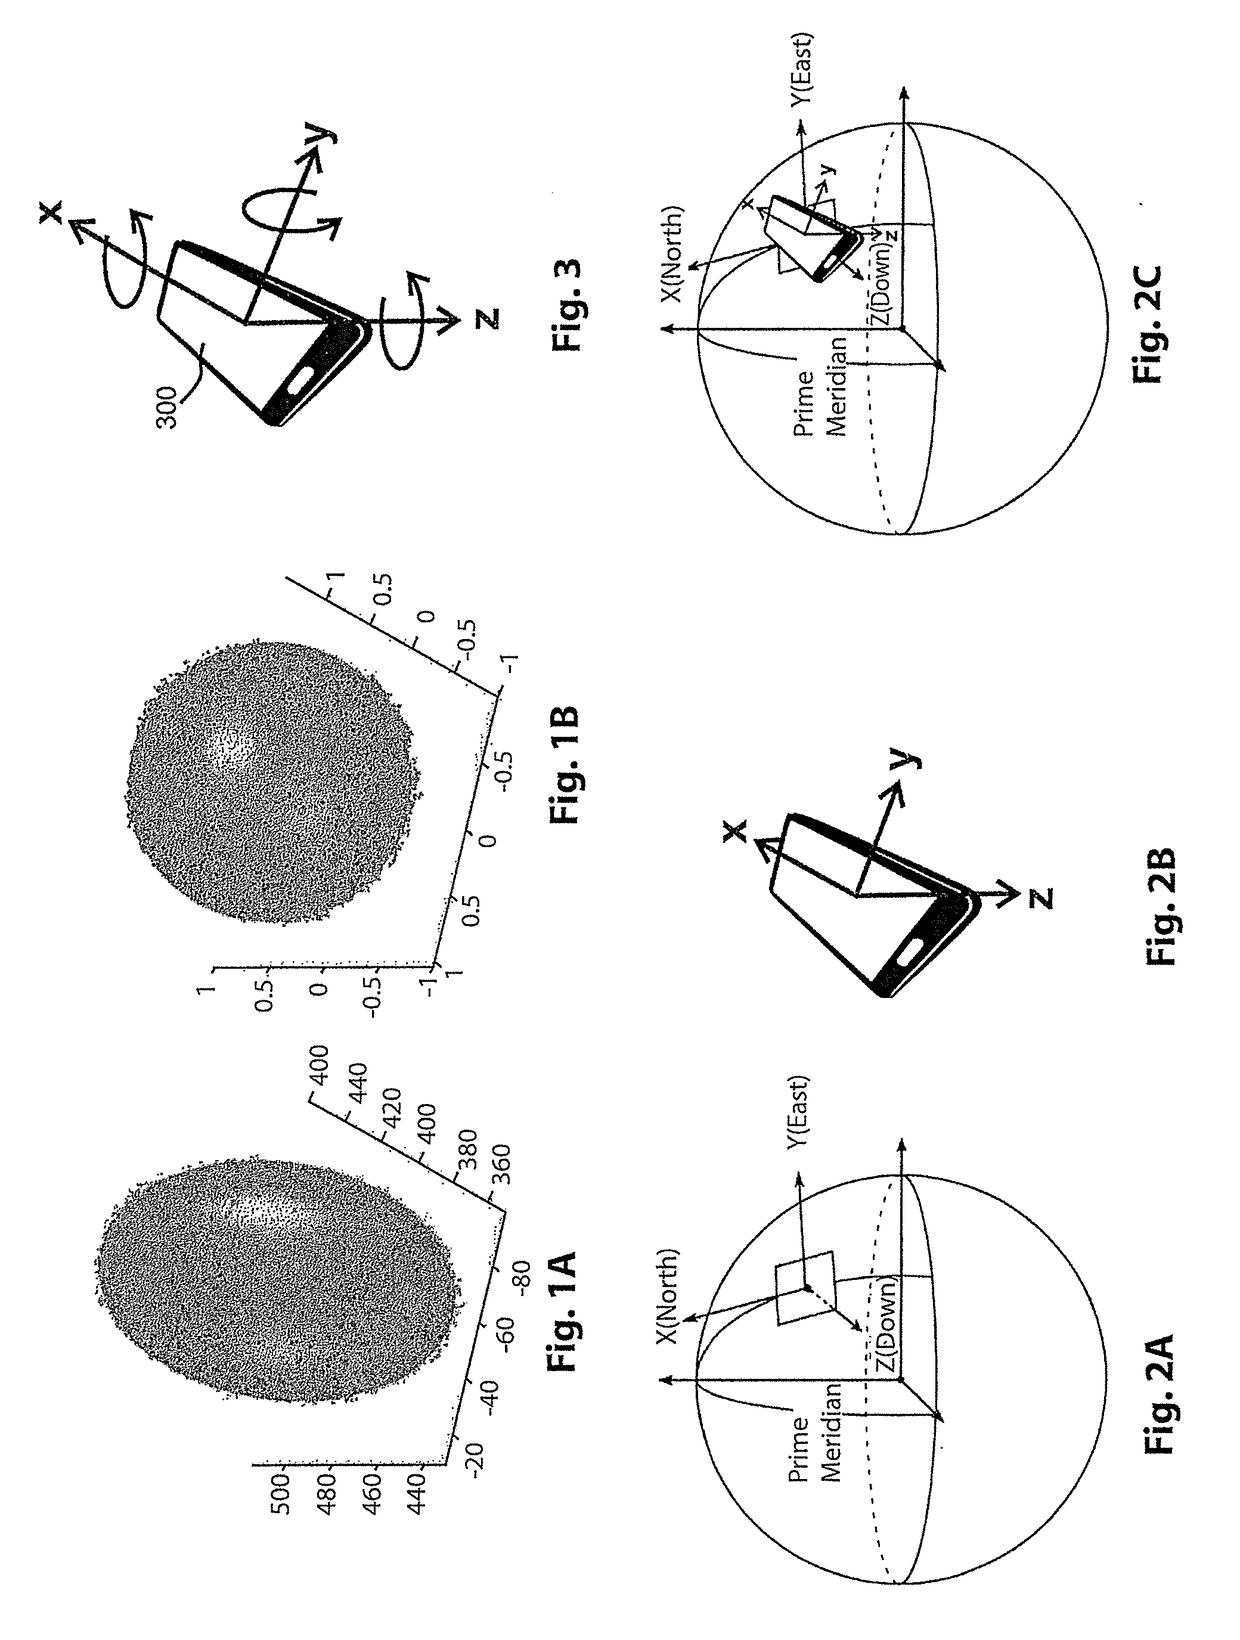 System and method for calibrating magnetic sensors in real and finite time